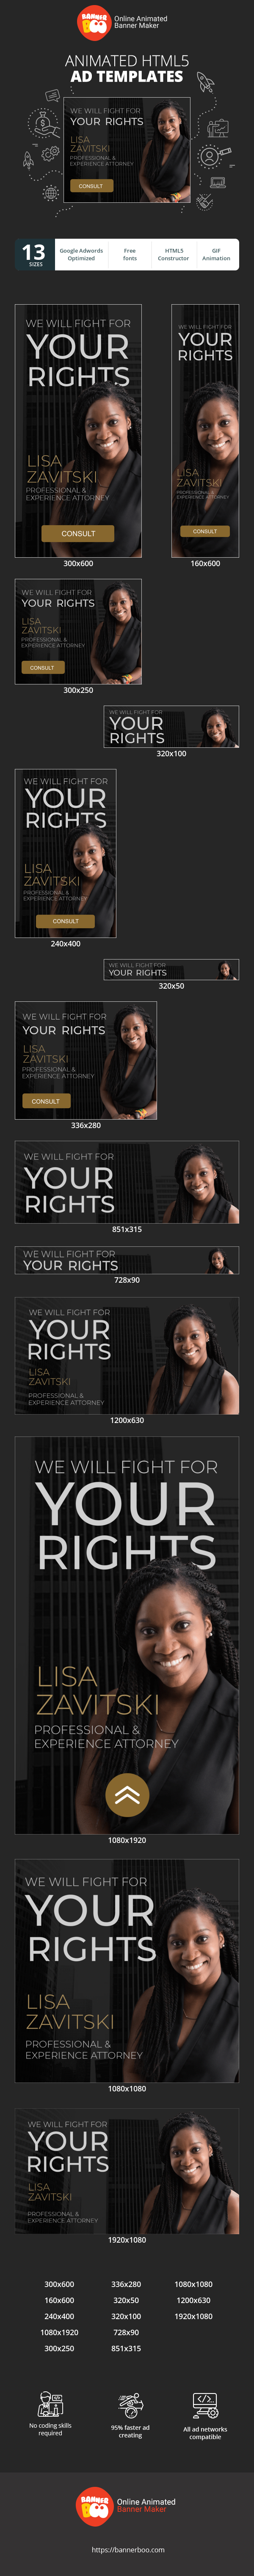 Banner ad template — We Will Fight For Your Rights — Professional & Experience Attorney